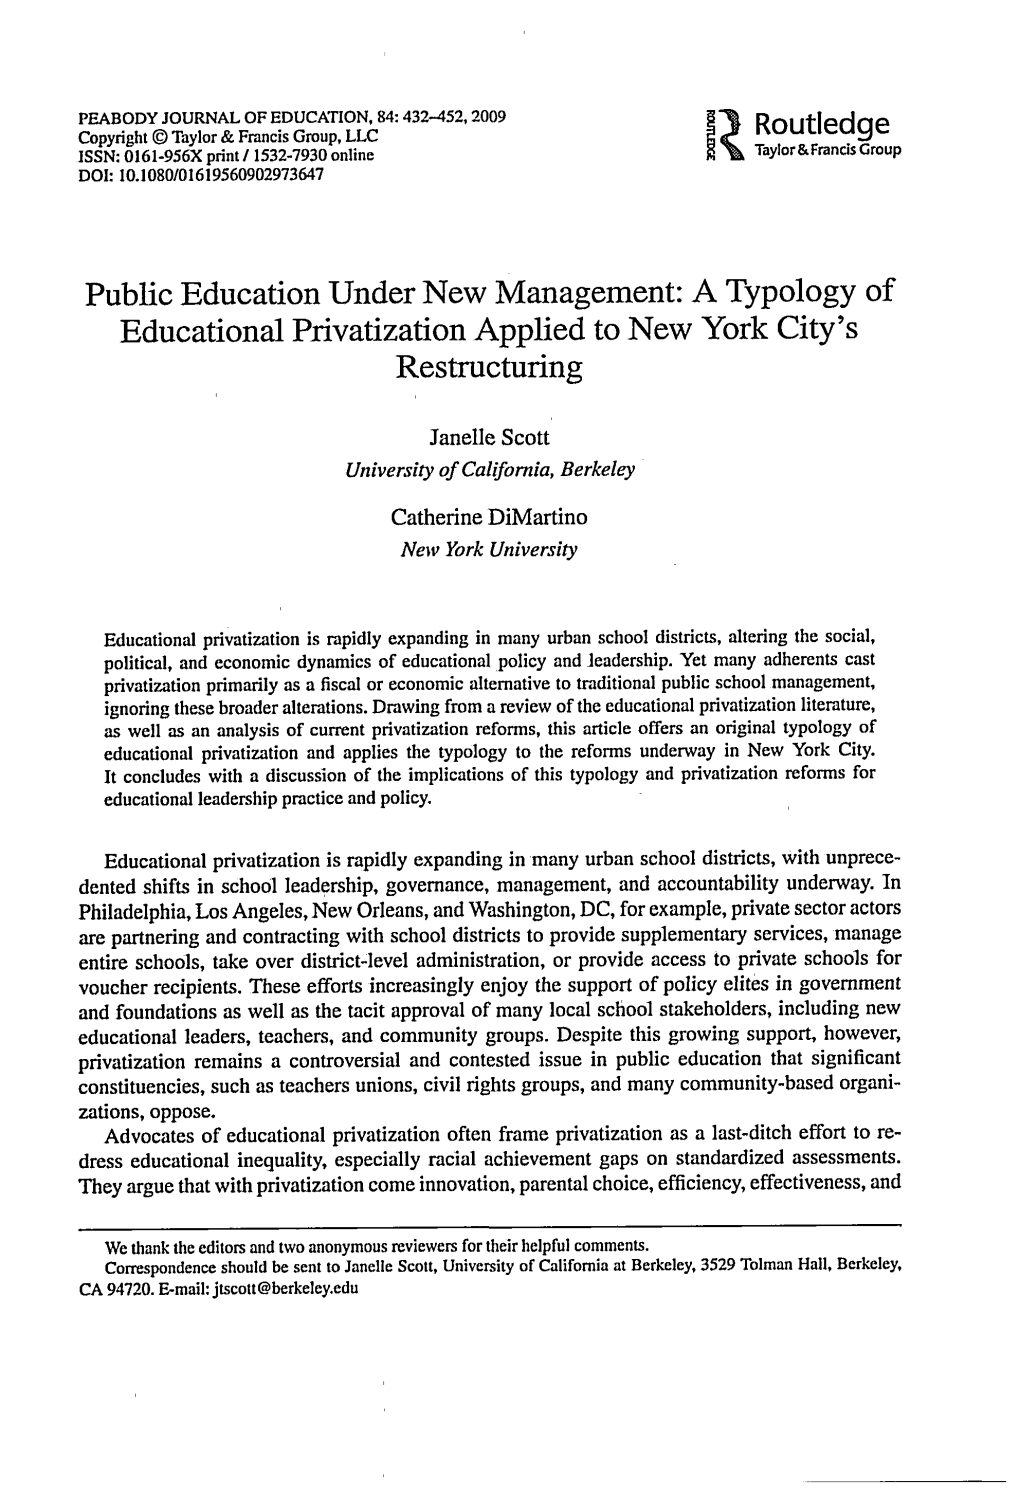 A Typology of Educational Privatization Applied to New York City's Restructuring